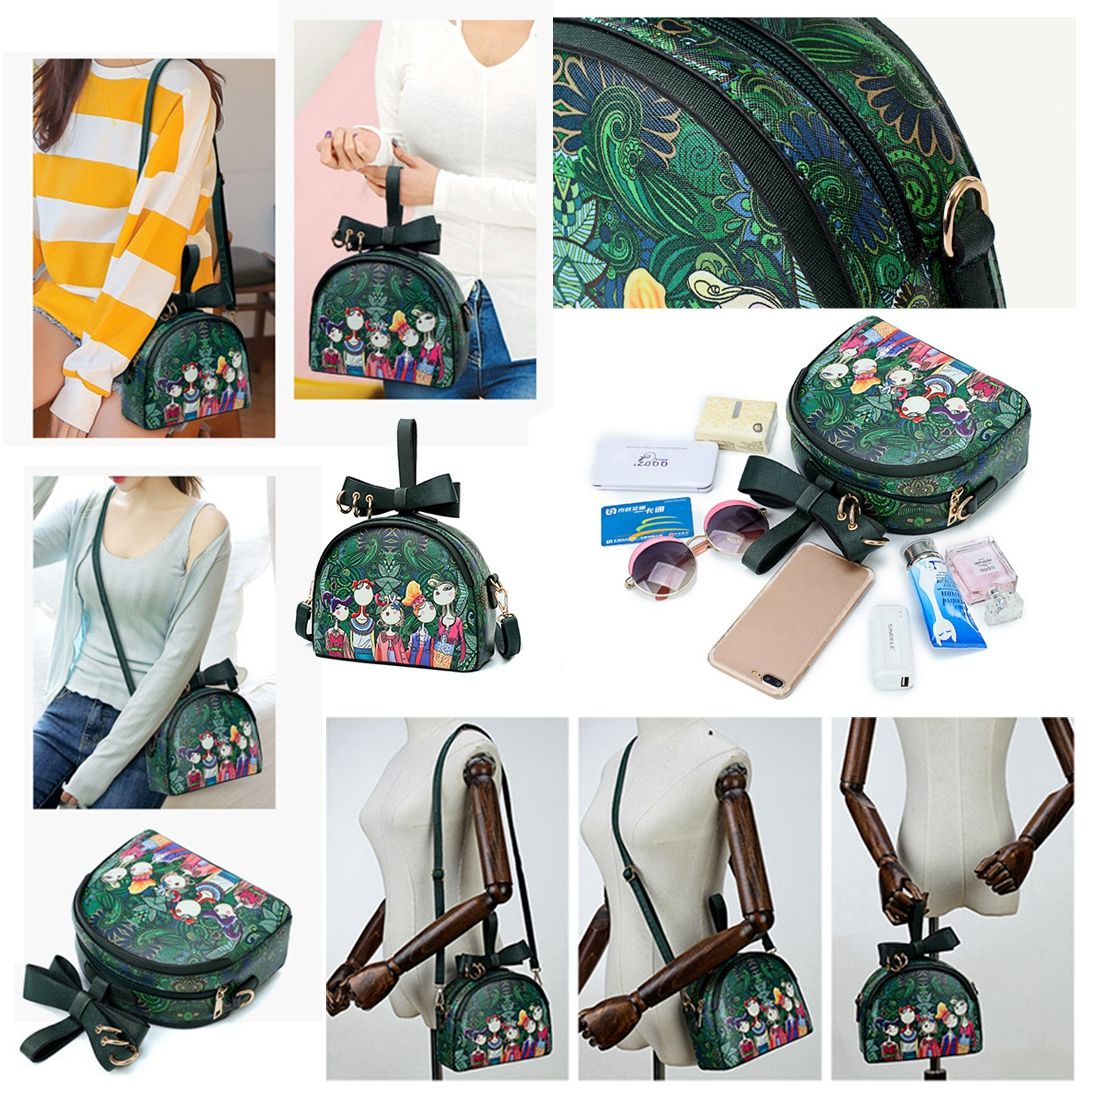 Ms. bag quilting forest girl printing green PU leather fashion trend small square shoulder diagonal package - ebowsos